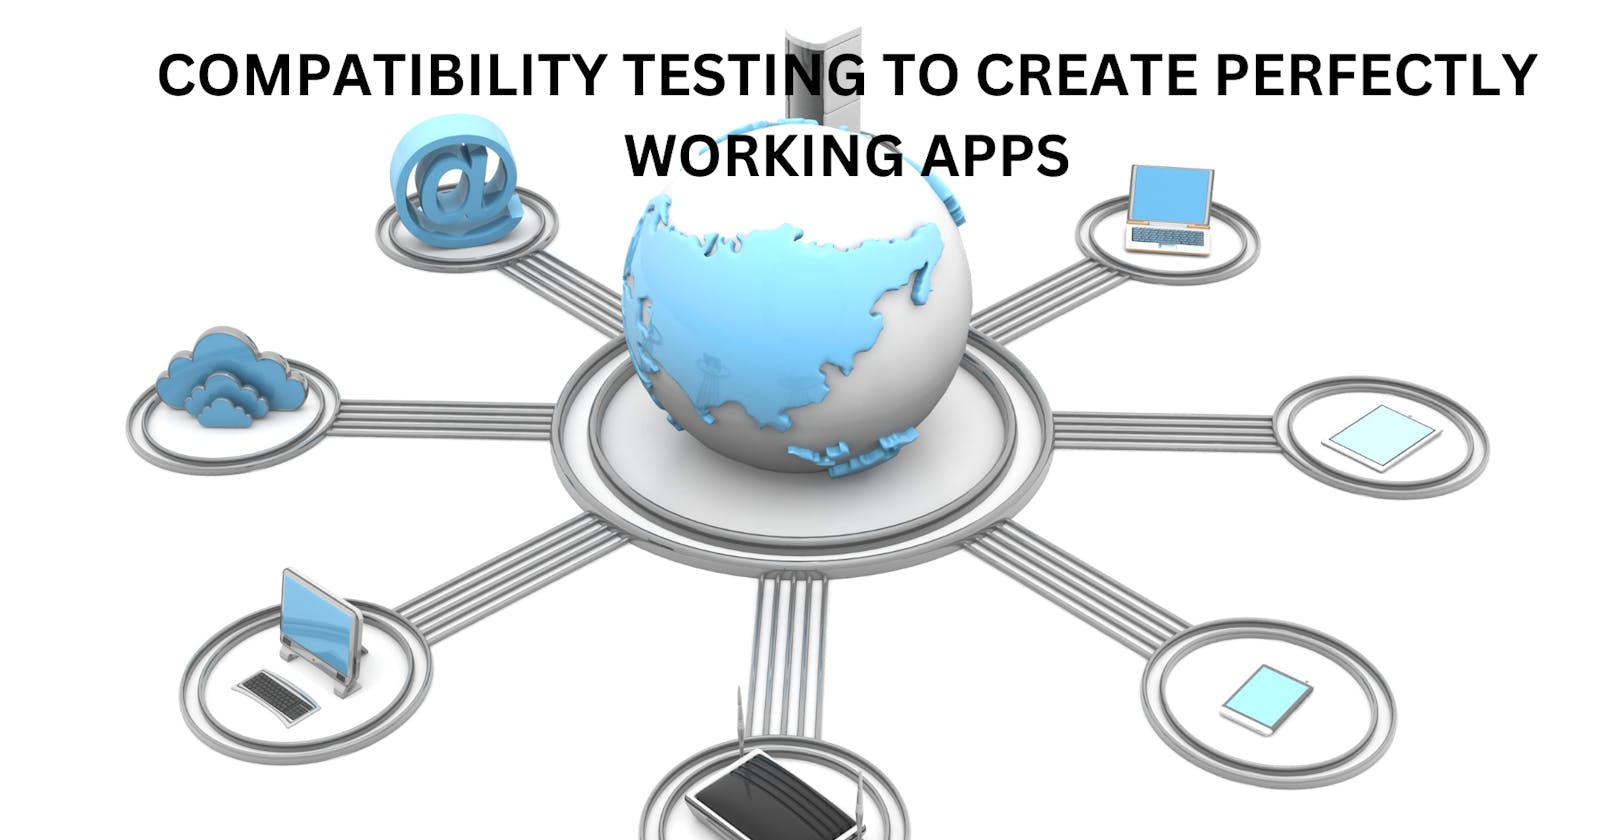 Compatibility Testing to Create Perfectly Working Apps